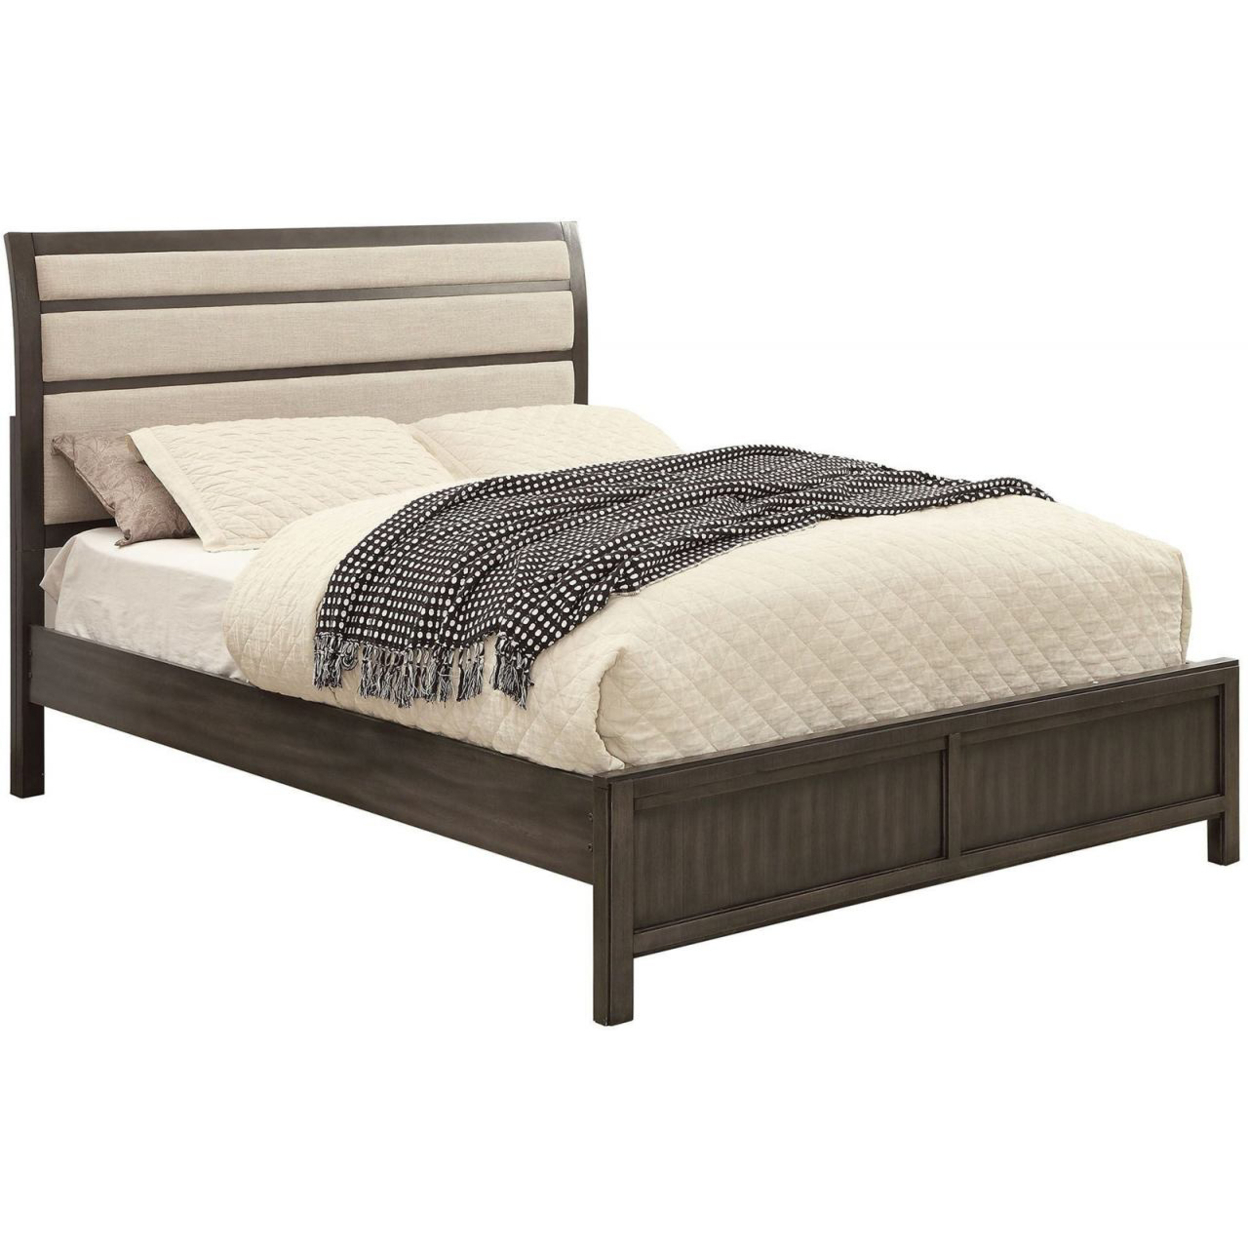 Platform Style Eastern King Bed With Padded Sleigh Headboard,Gray And Beige- Saltoro Sherpi